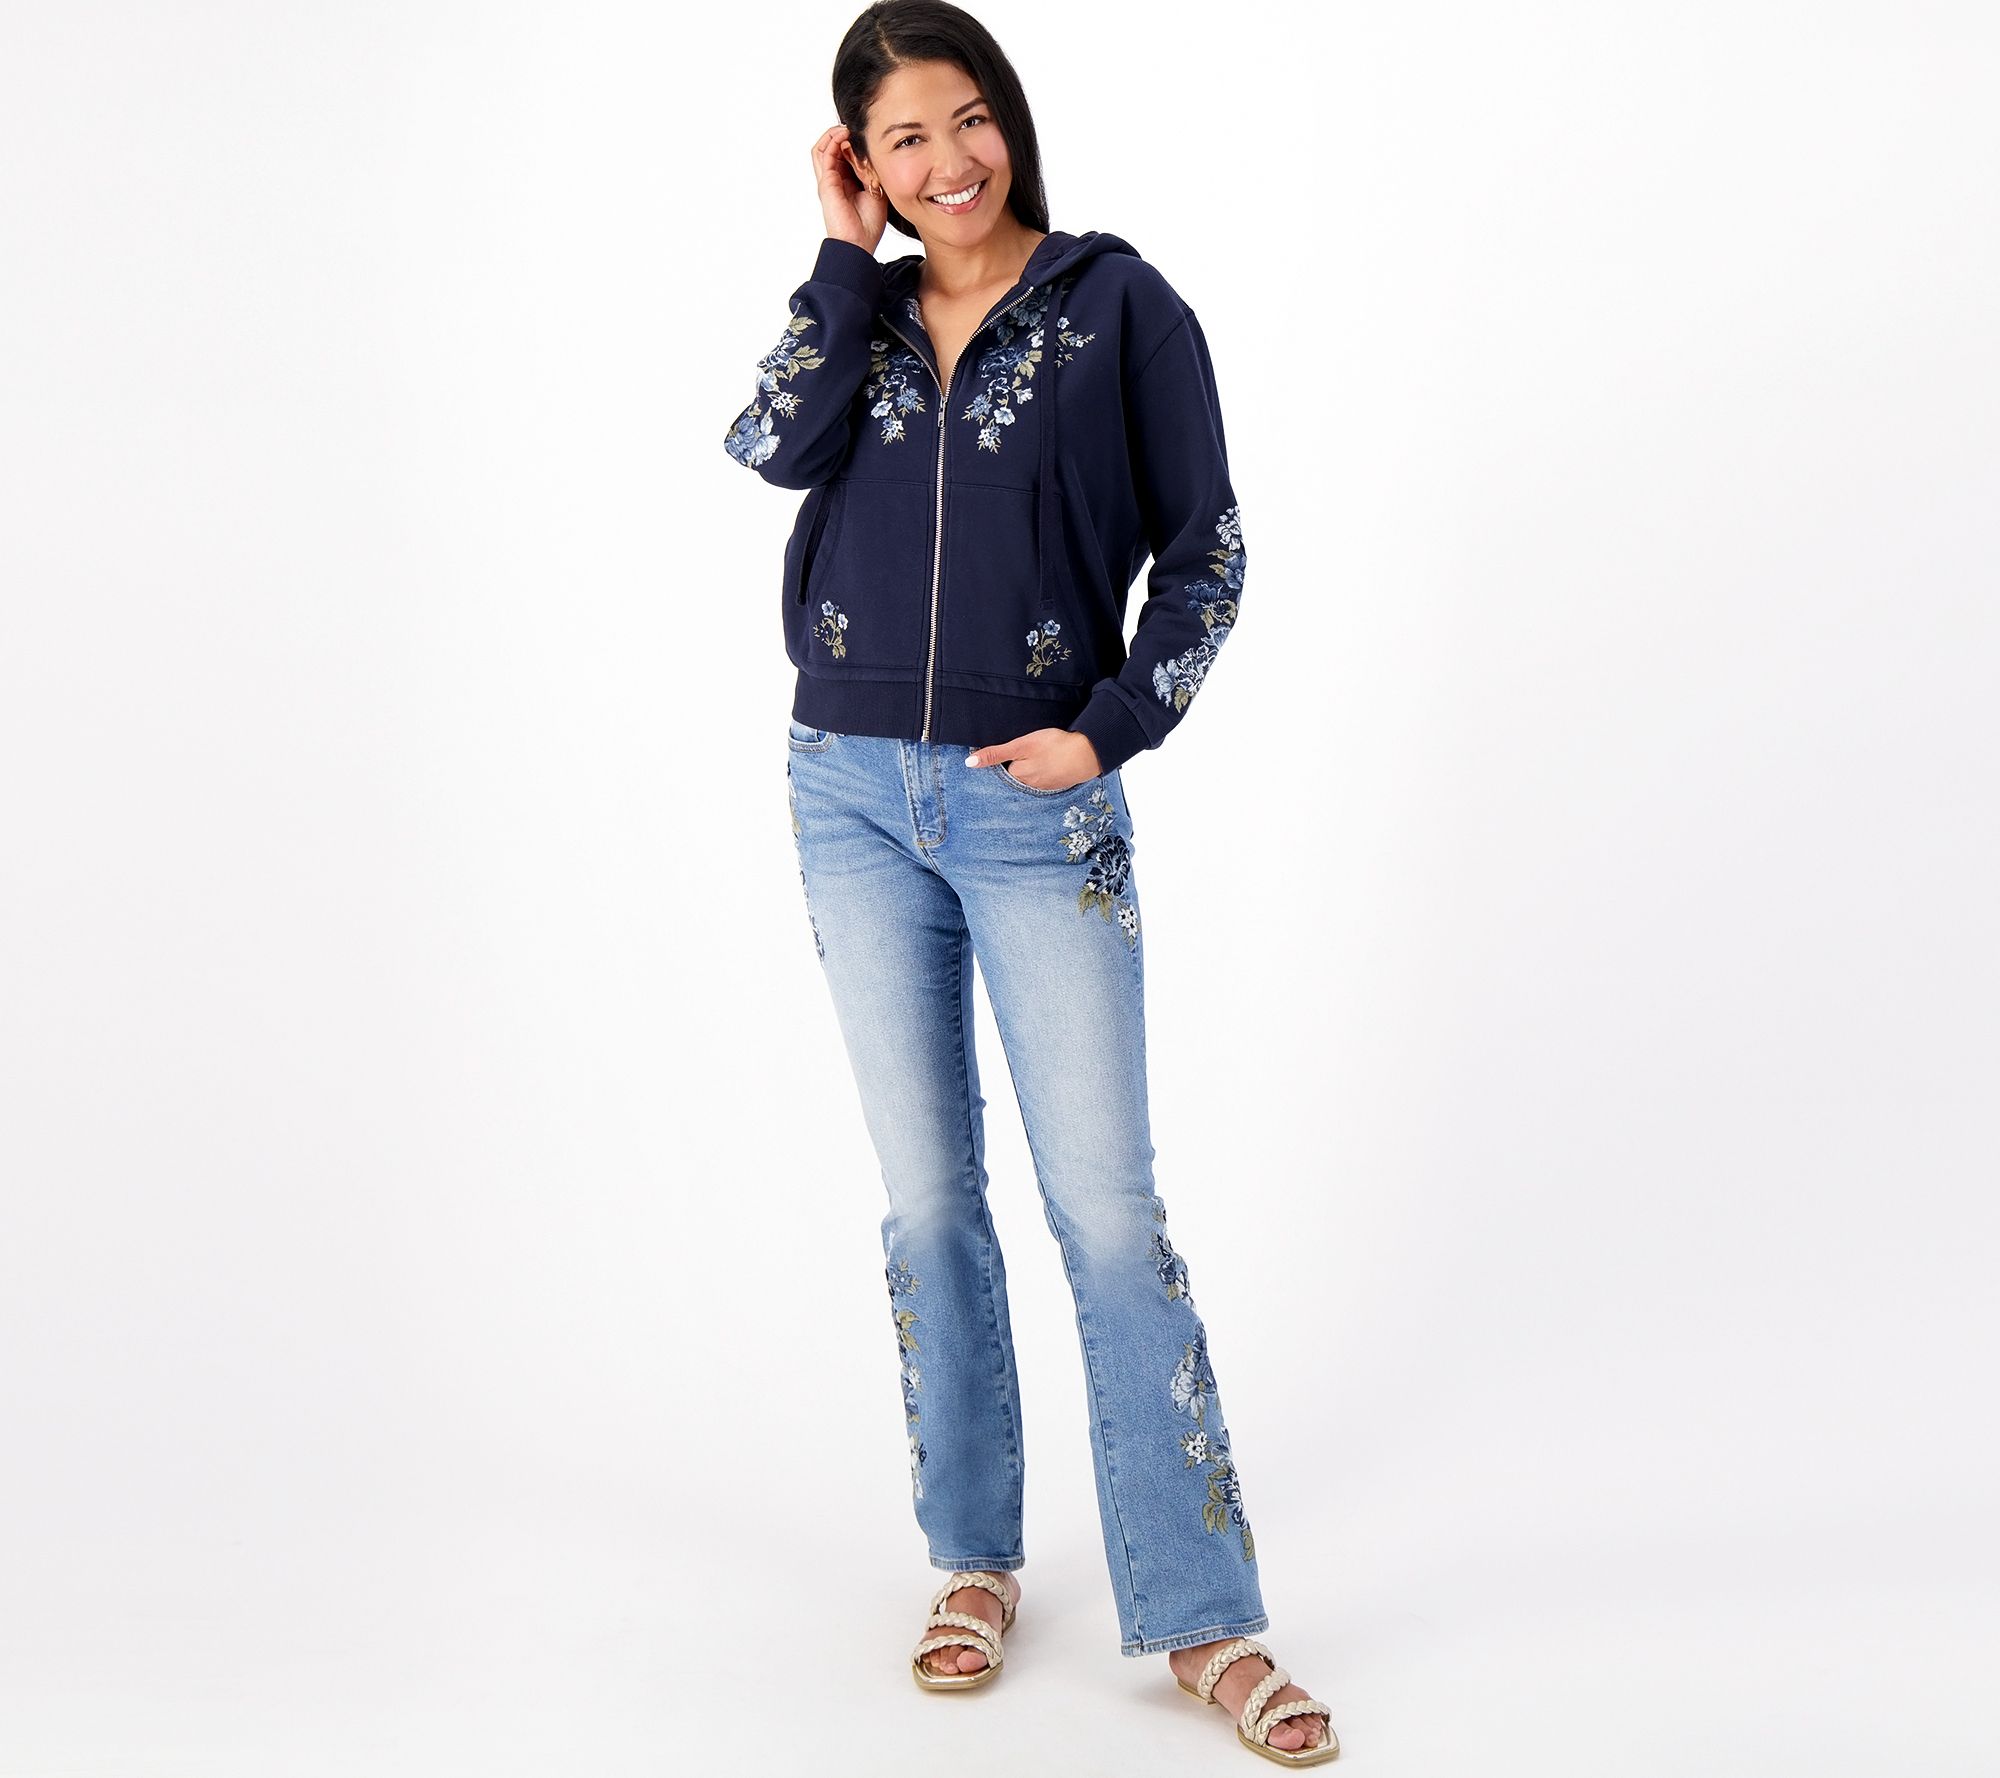 Driftwood Jeans Embroidered Zip-Up Hoodie- Blue Bell Fleur